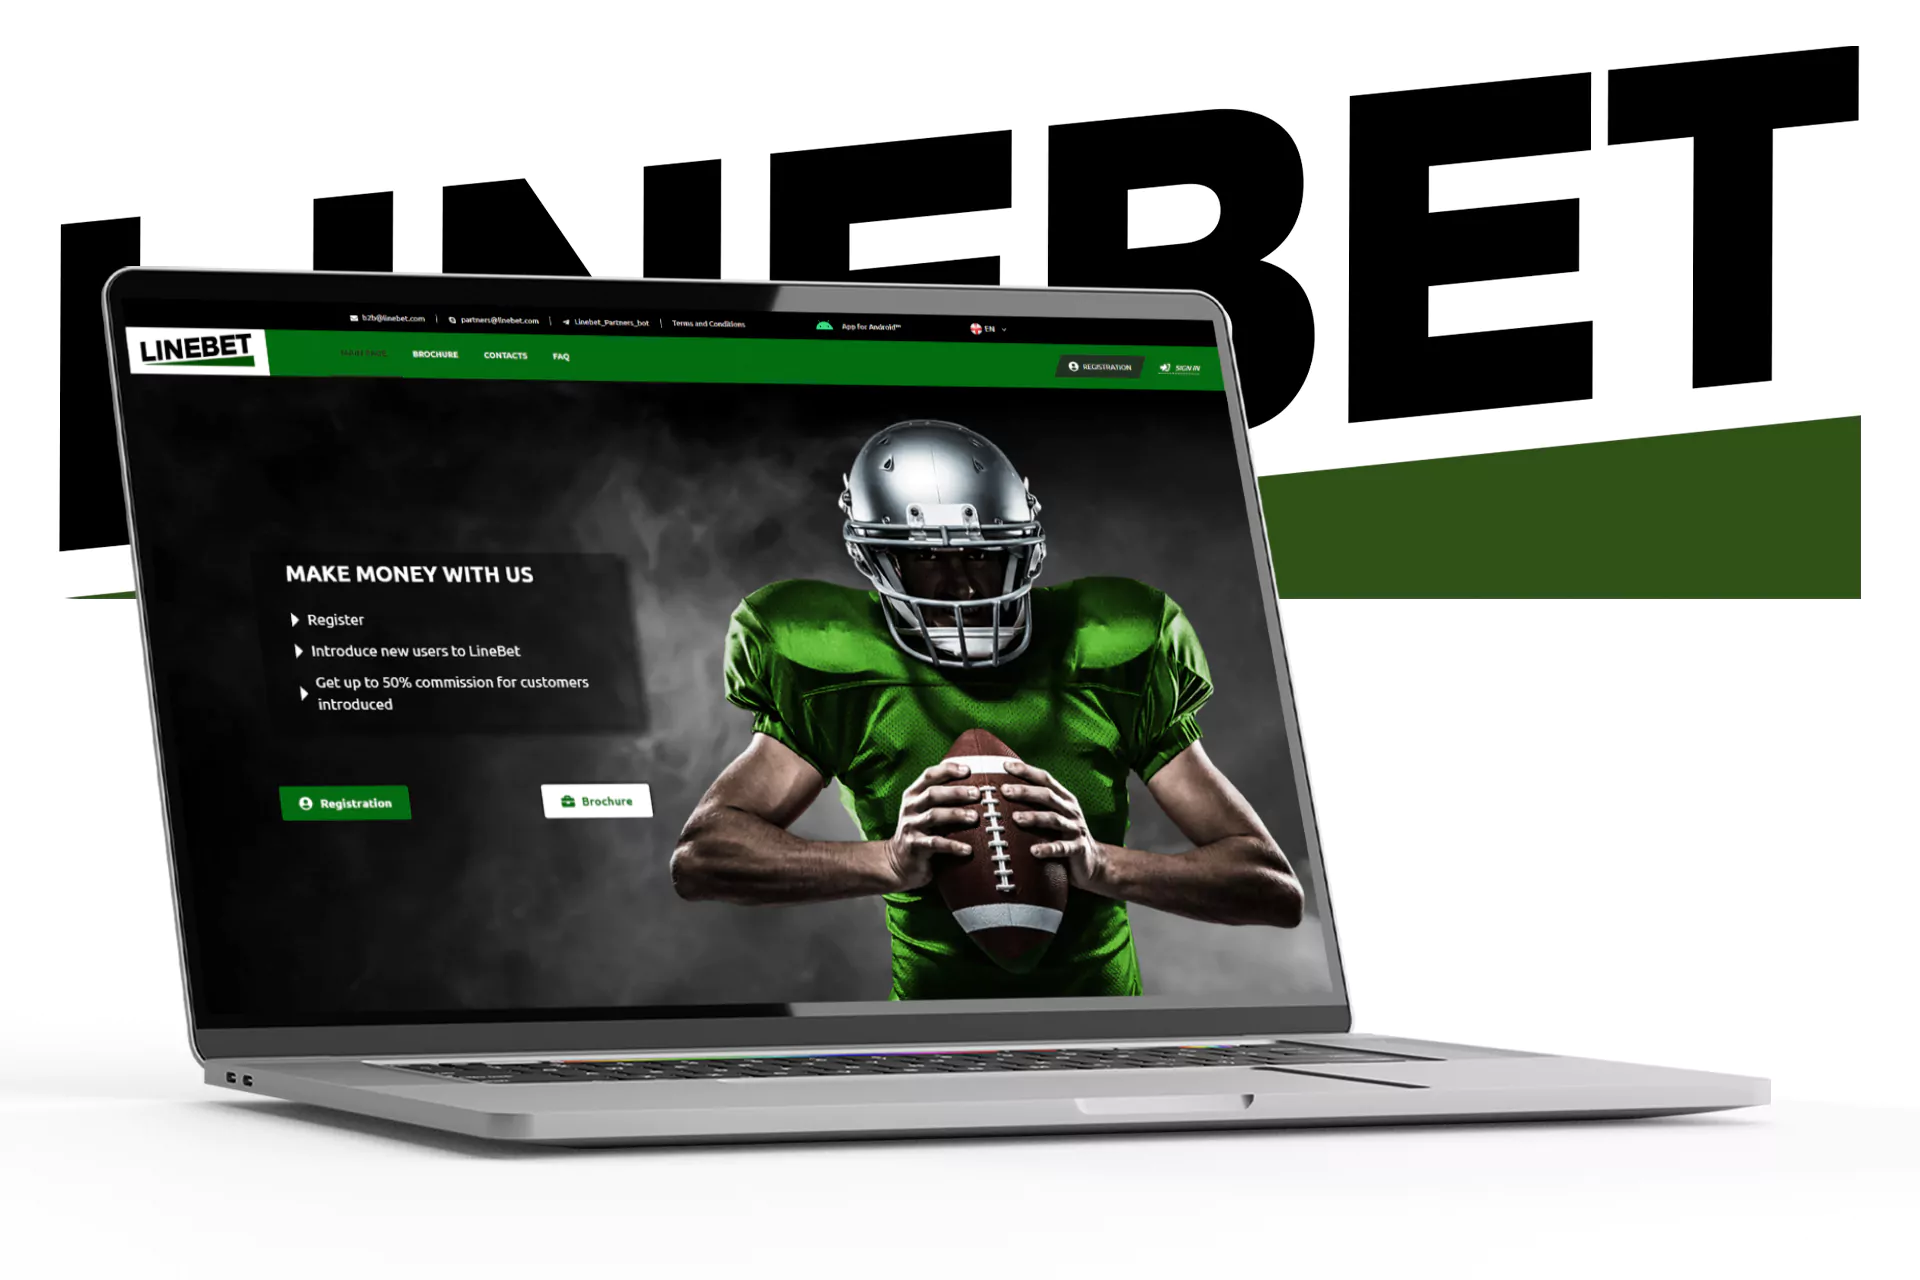 You can increase your profit using the affiliate program of Linebet.